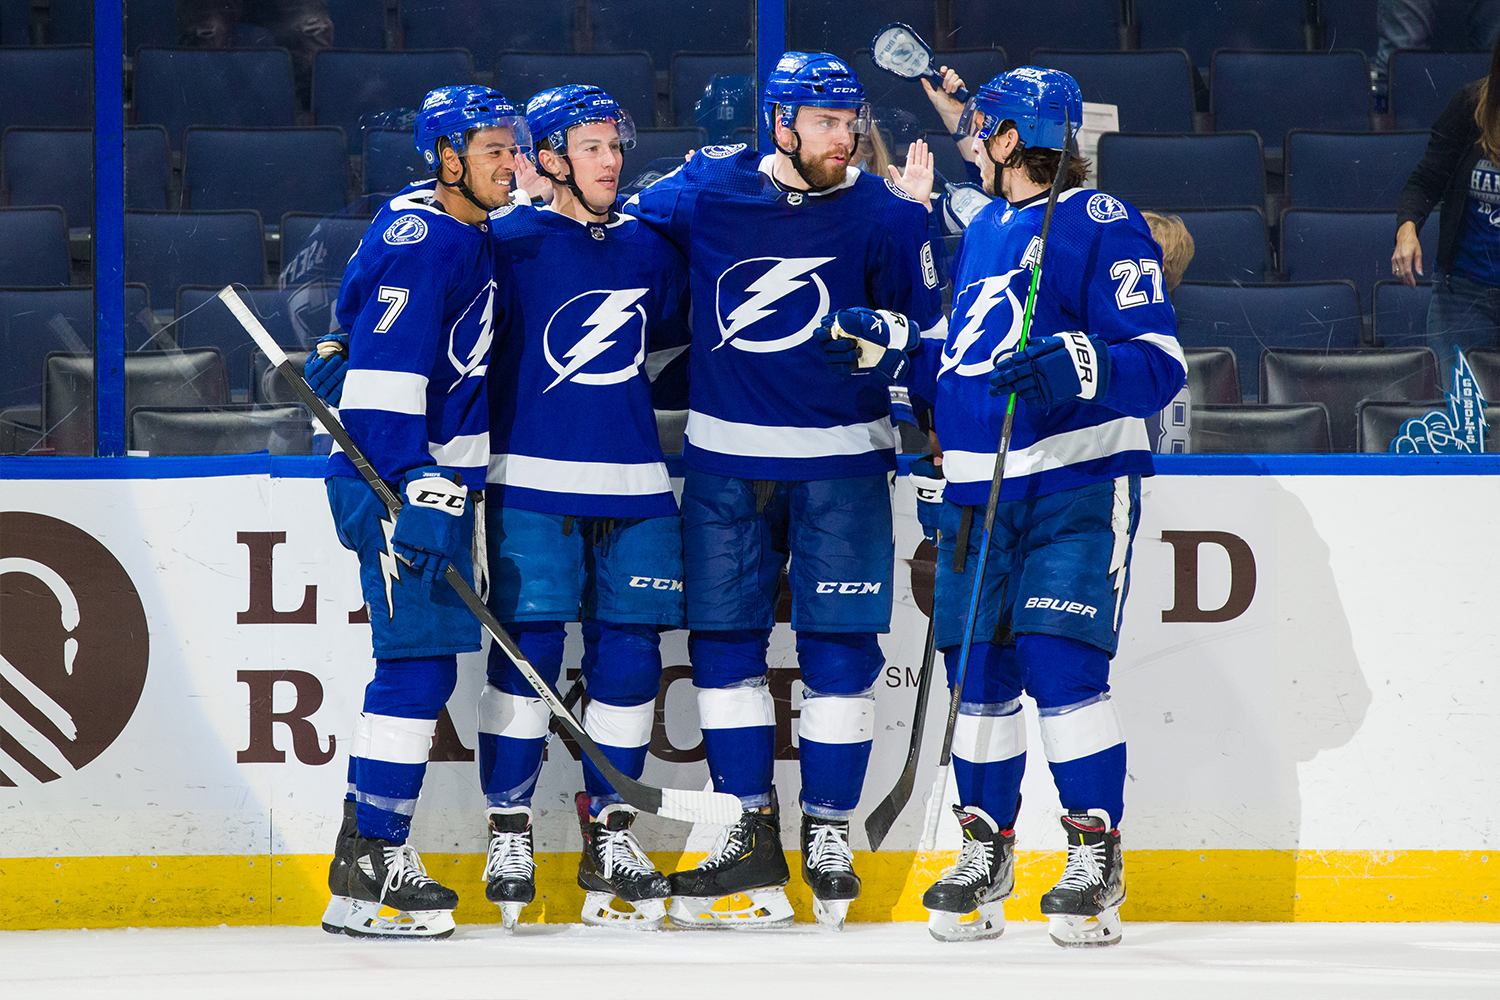 Ross Colton #79 of the Tampa Bay Lightning celebrates his goal with teammates Mathieu Joseph #7, Erik Cernak #81, and Ryan McDonagh #27 against the Dallas Stars during the third period at Amalie Arena on May 5, 2021